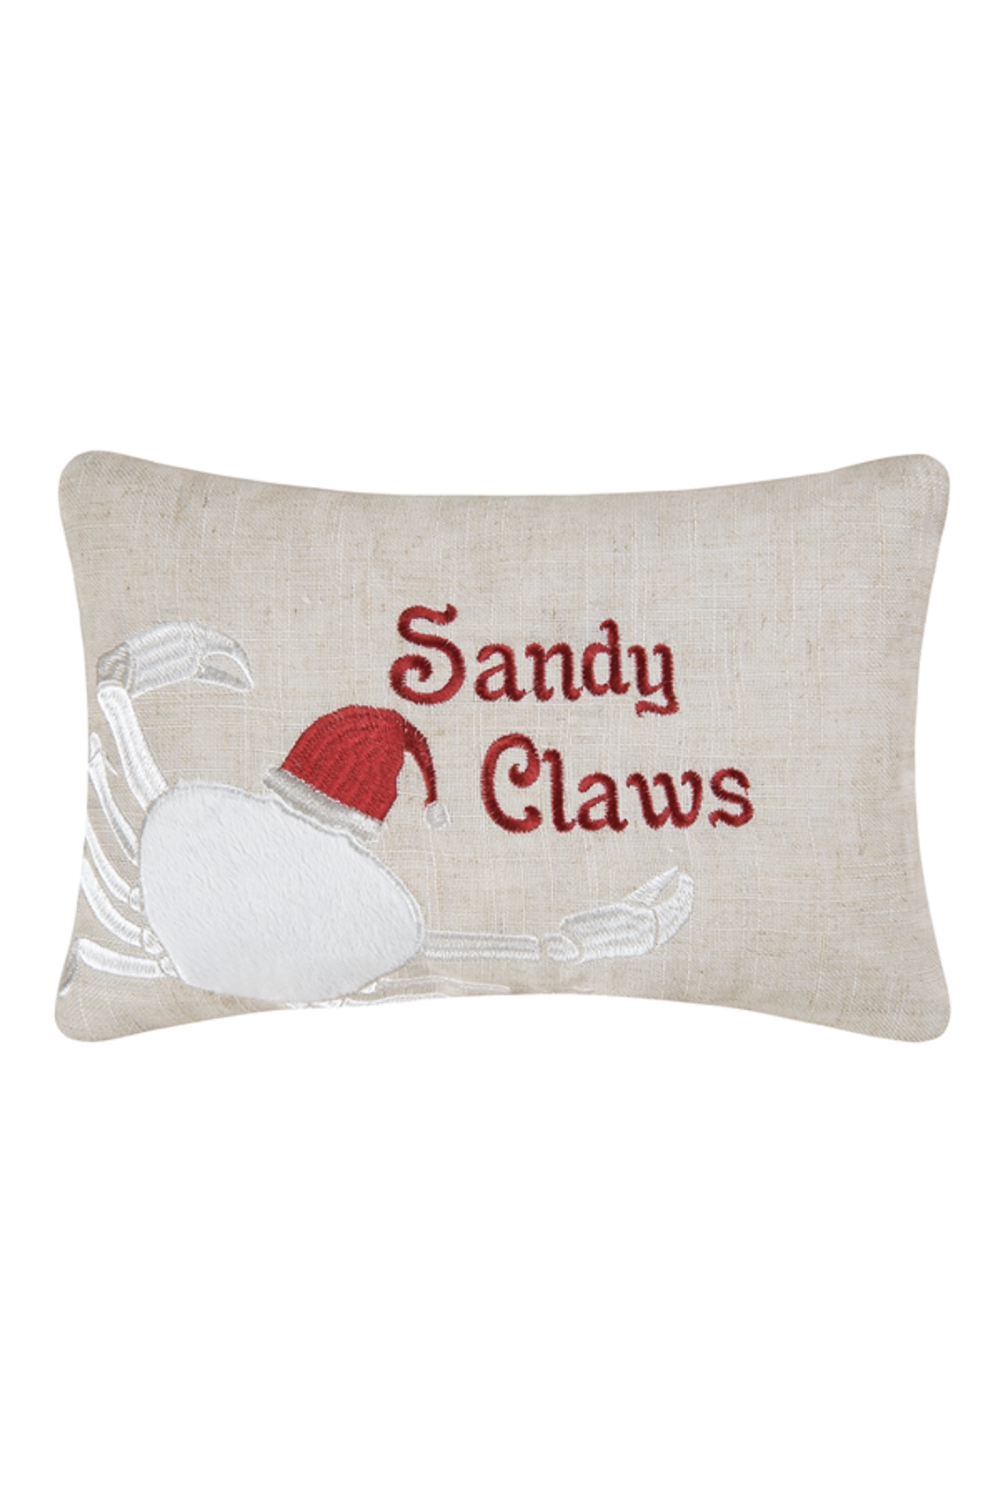 Mini Holiday Pillow - Sandy Claws Pillow